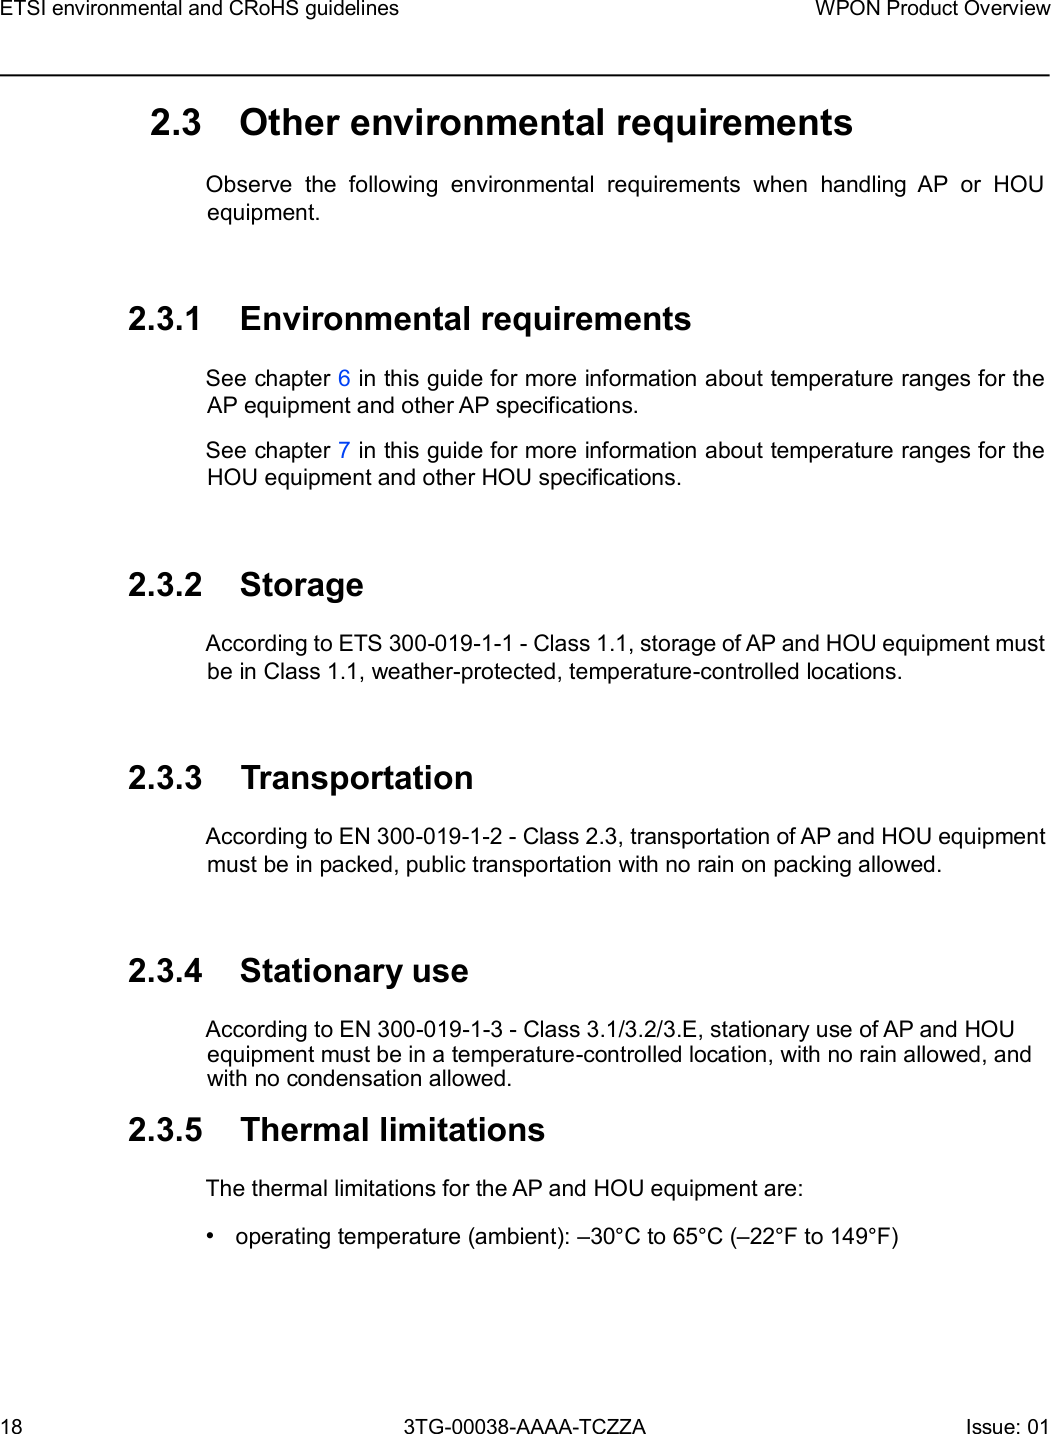 Page 18 of Nokia Bell 7577WPONAPED WPON User Manual WPON Product Overview